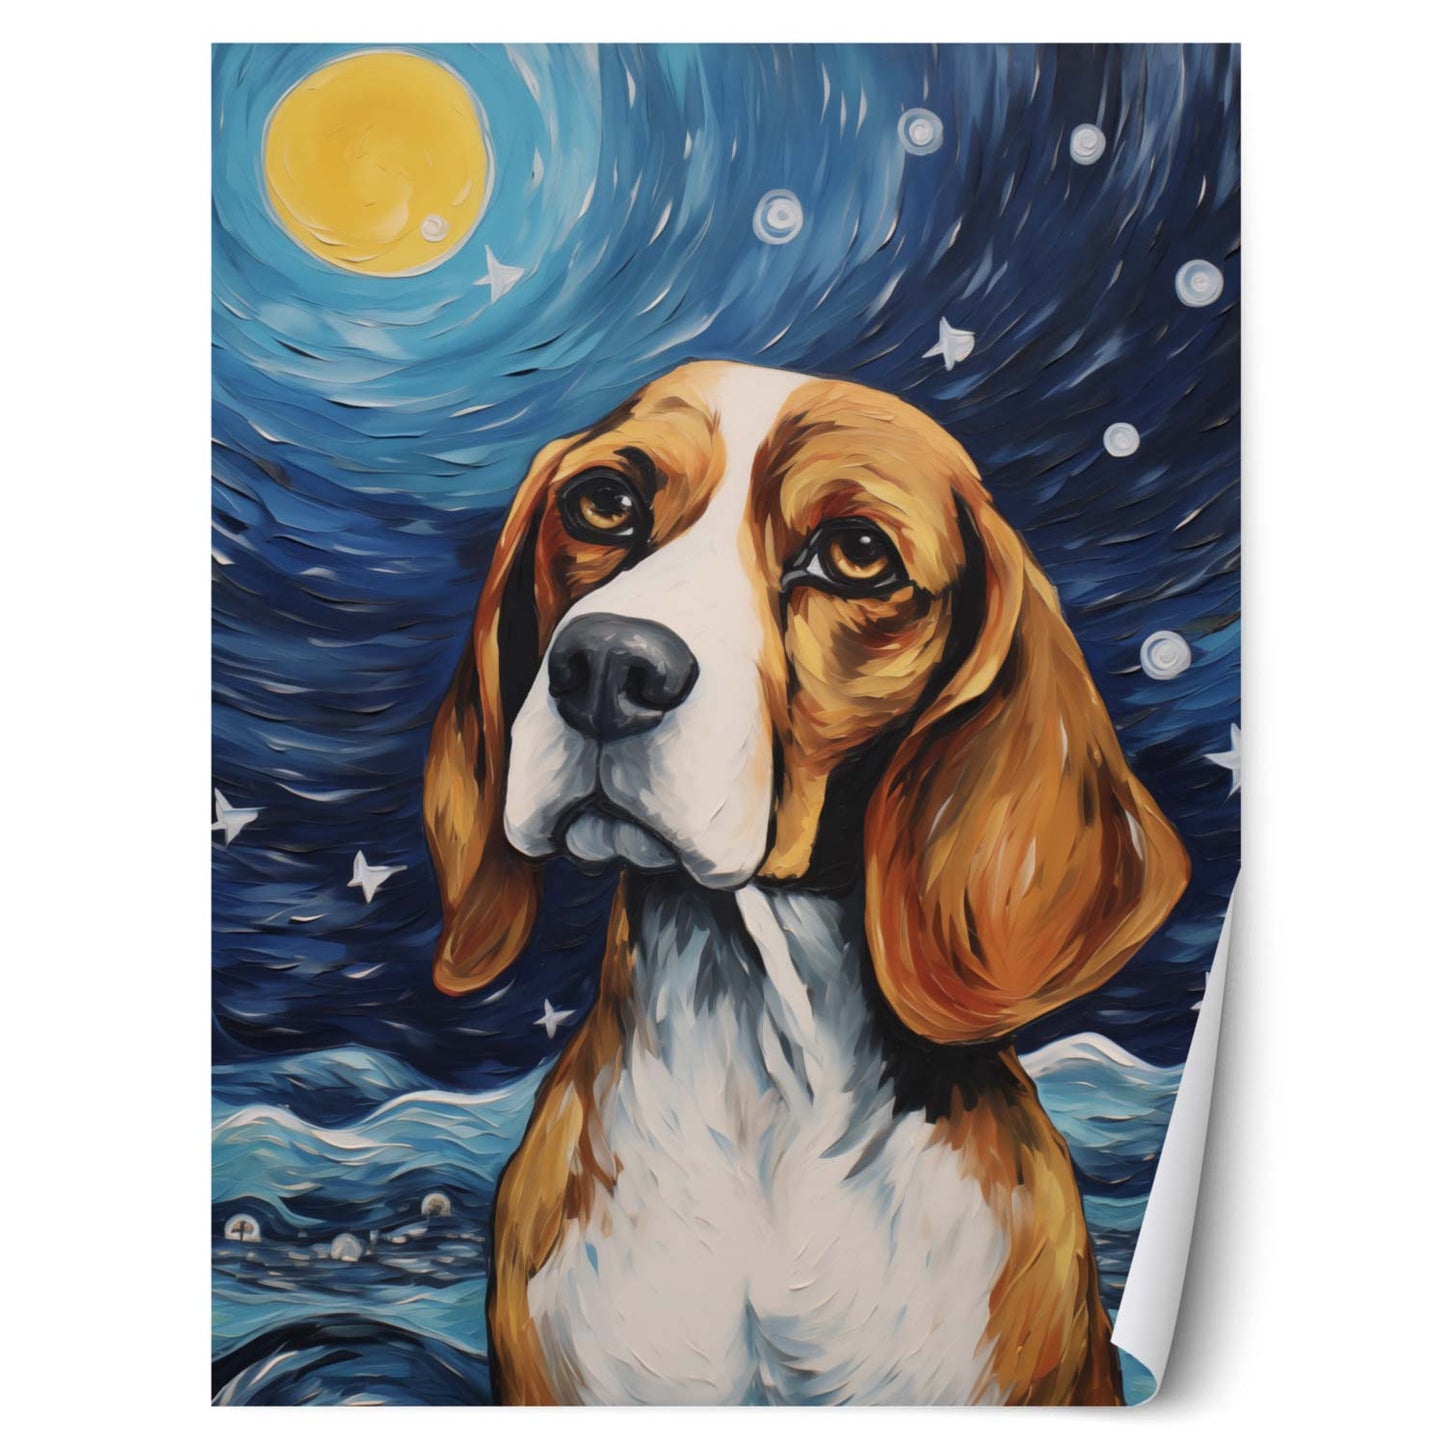 Starry Night Beagle Poster